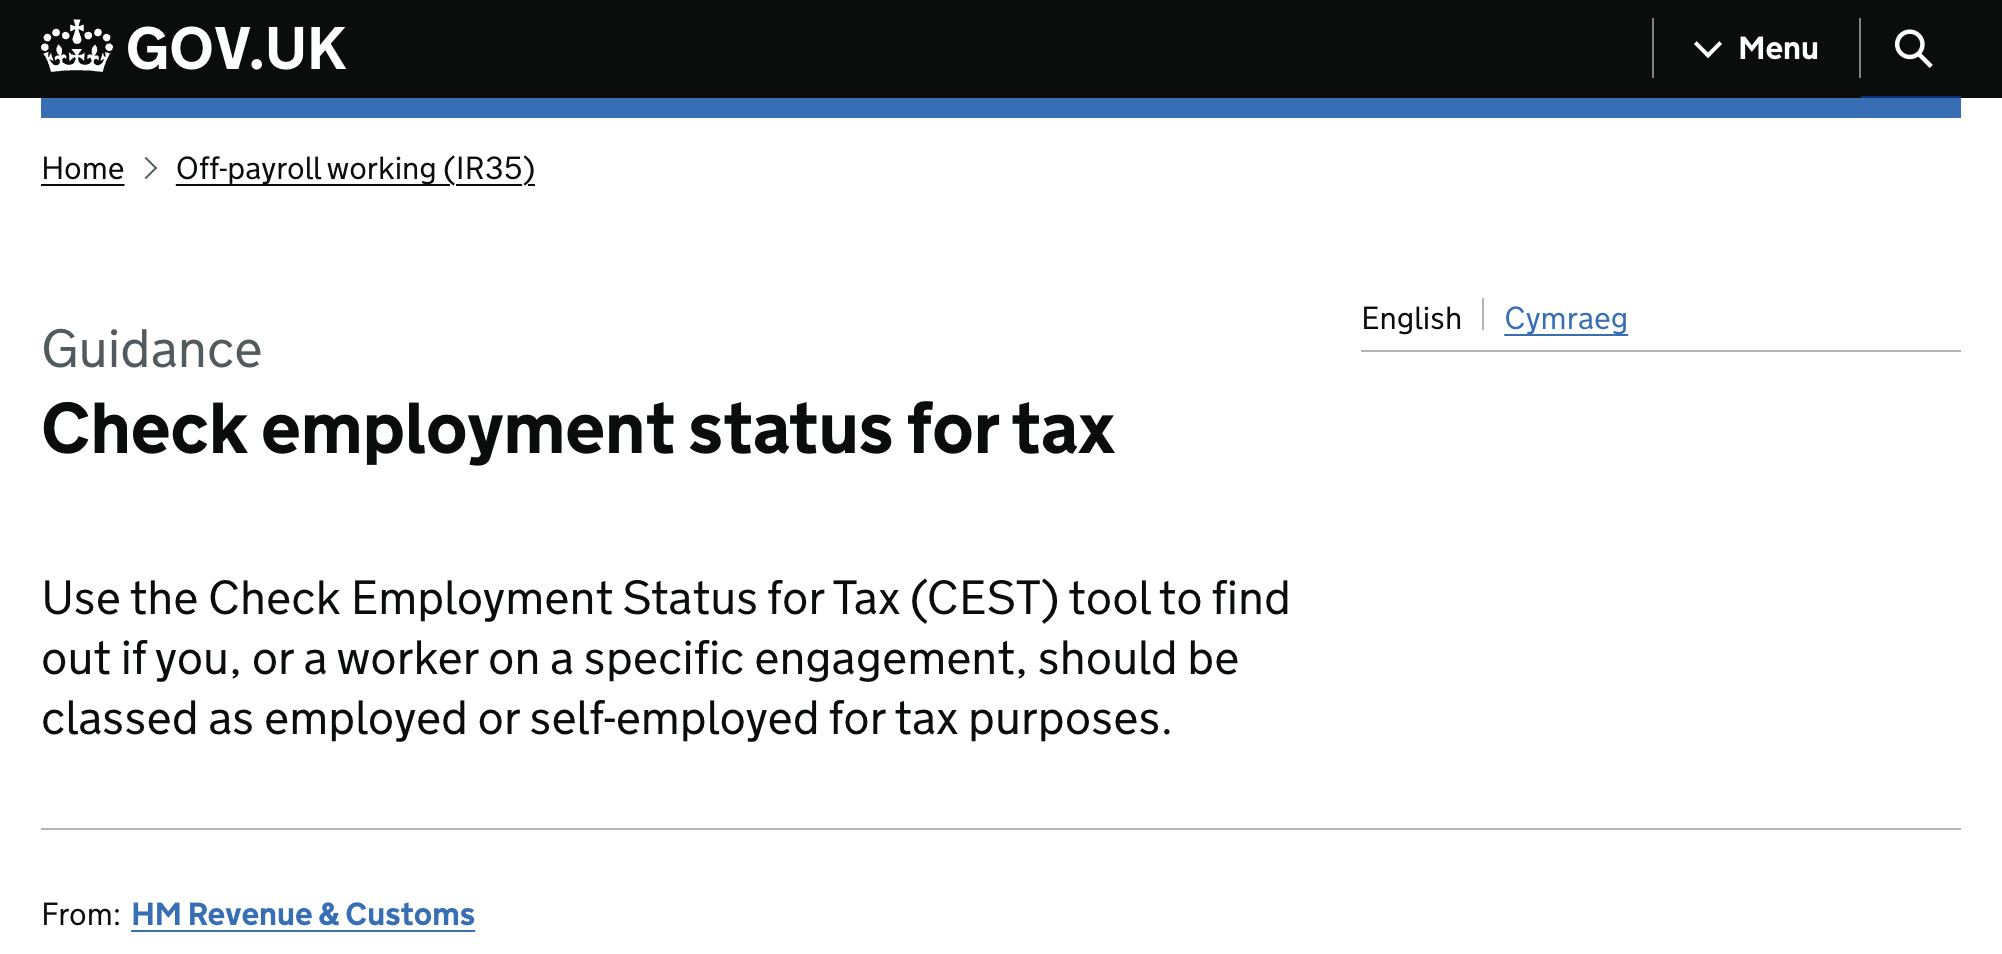 Guidance: Check employment status for tax. English or Cymraeg. Use the Check Employment Status for Tax (CEST) tool to find out if you, or a worker on a specific engagement, should be classed as employed or self-employed for tax purposes.